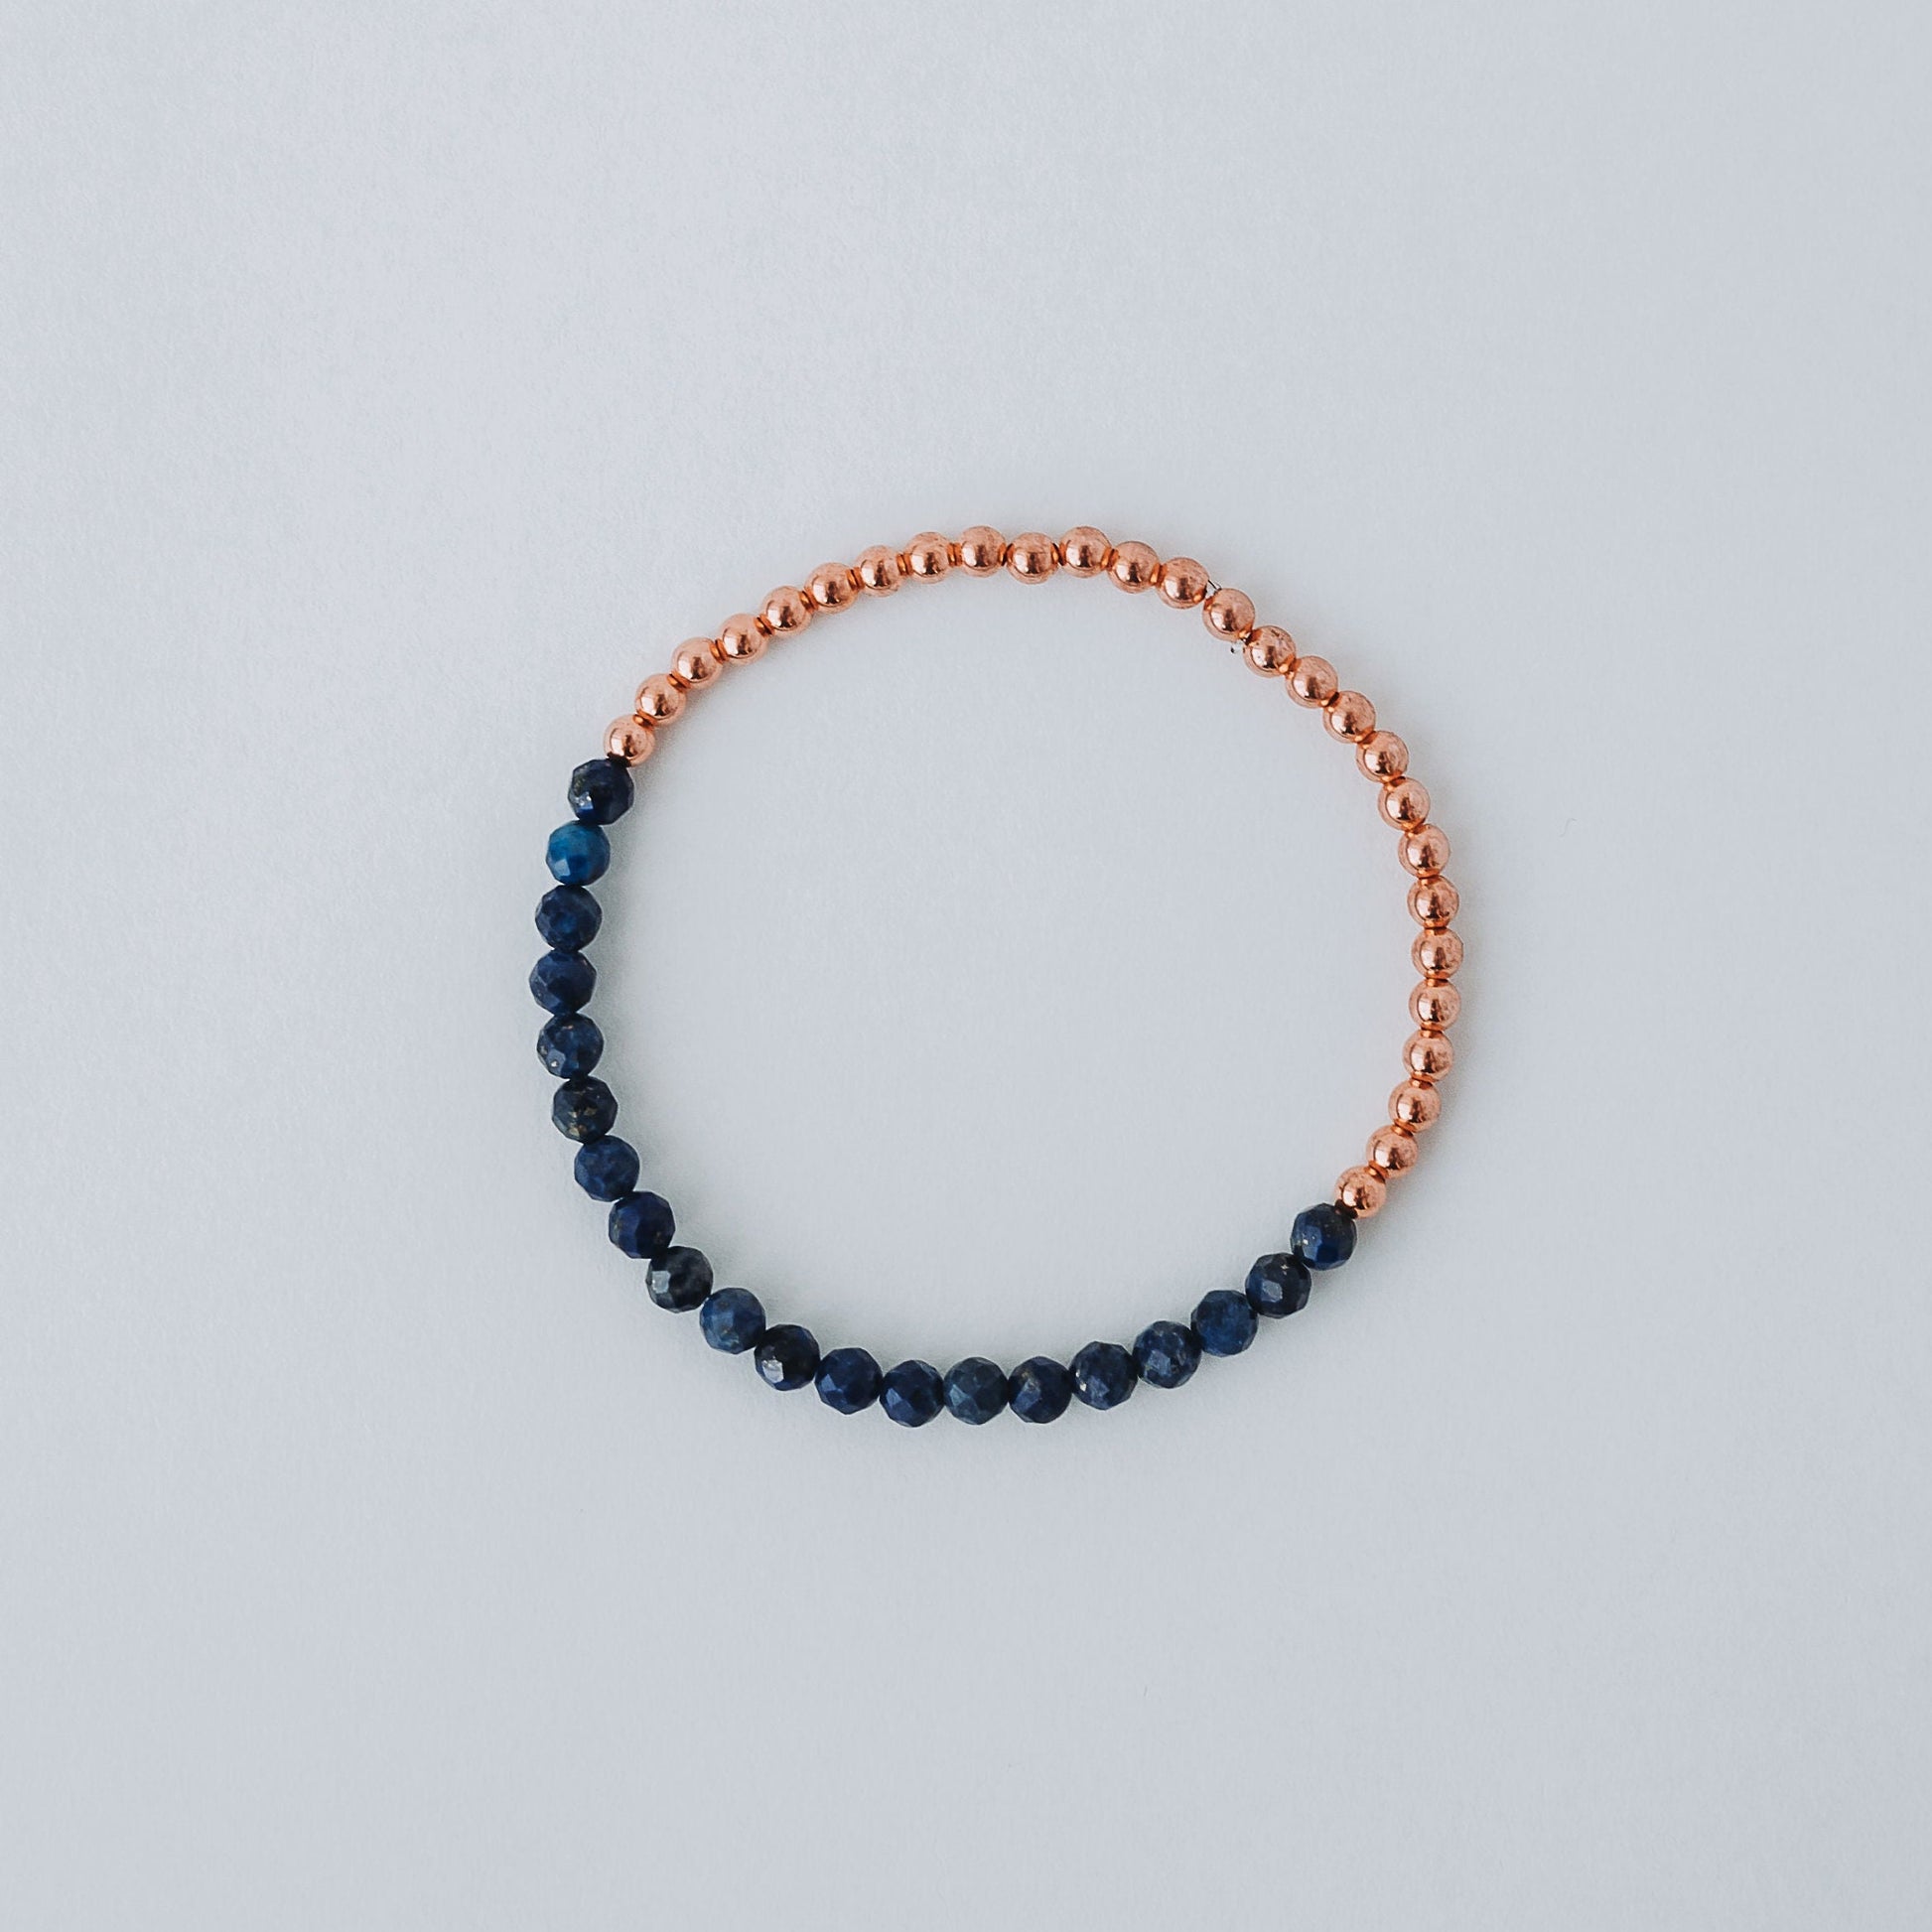 Dainty and Elegant Multi-Faceted Lapis Lazuli beads + Genuine and solid 3mm Copper Bead Bracelet - Stretchy and Stackable - Theblueyogi